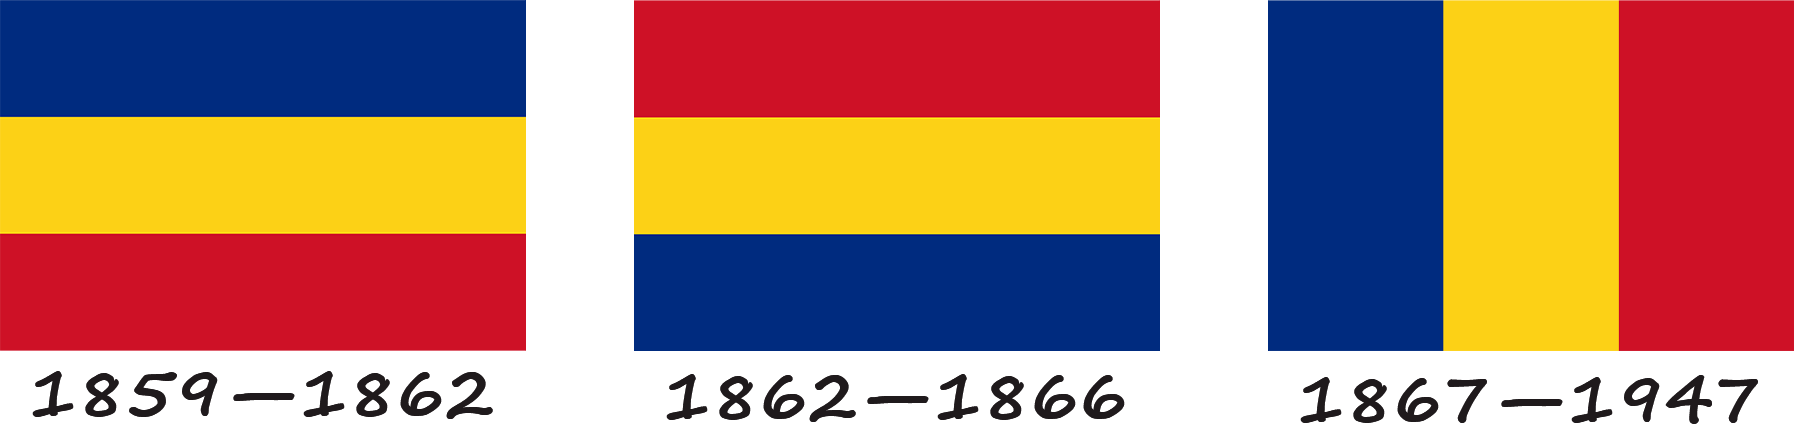 History of the Romanian flag